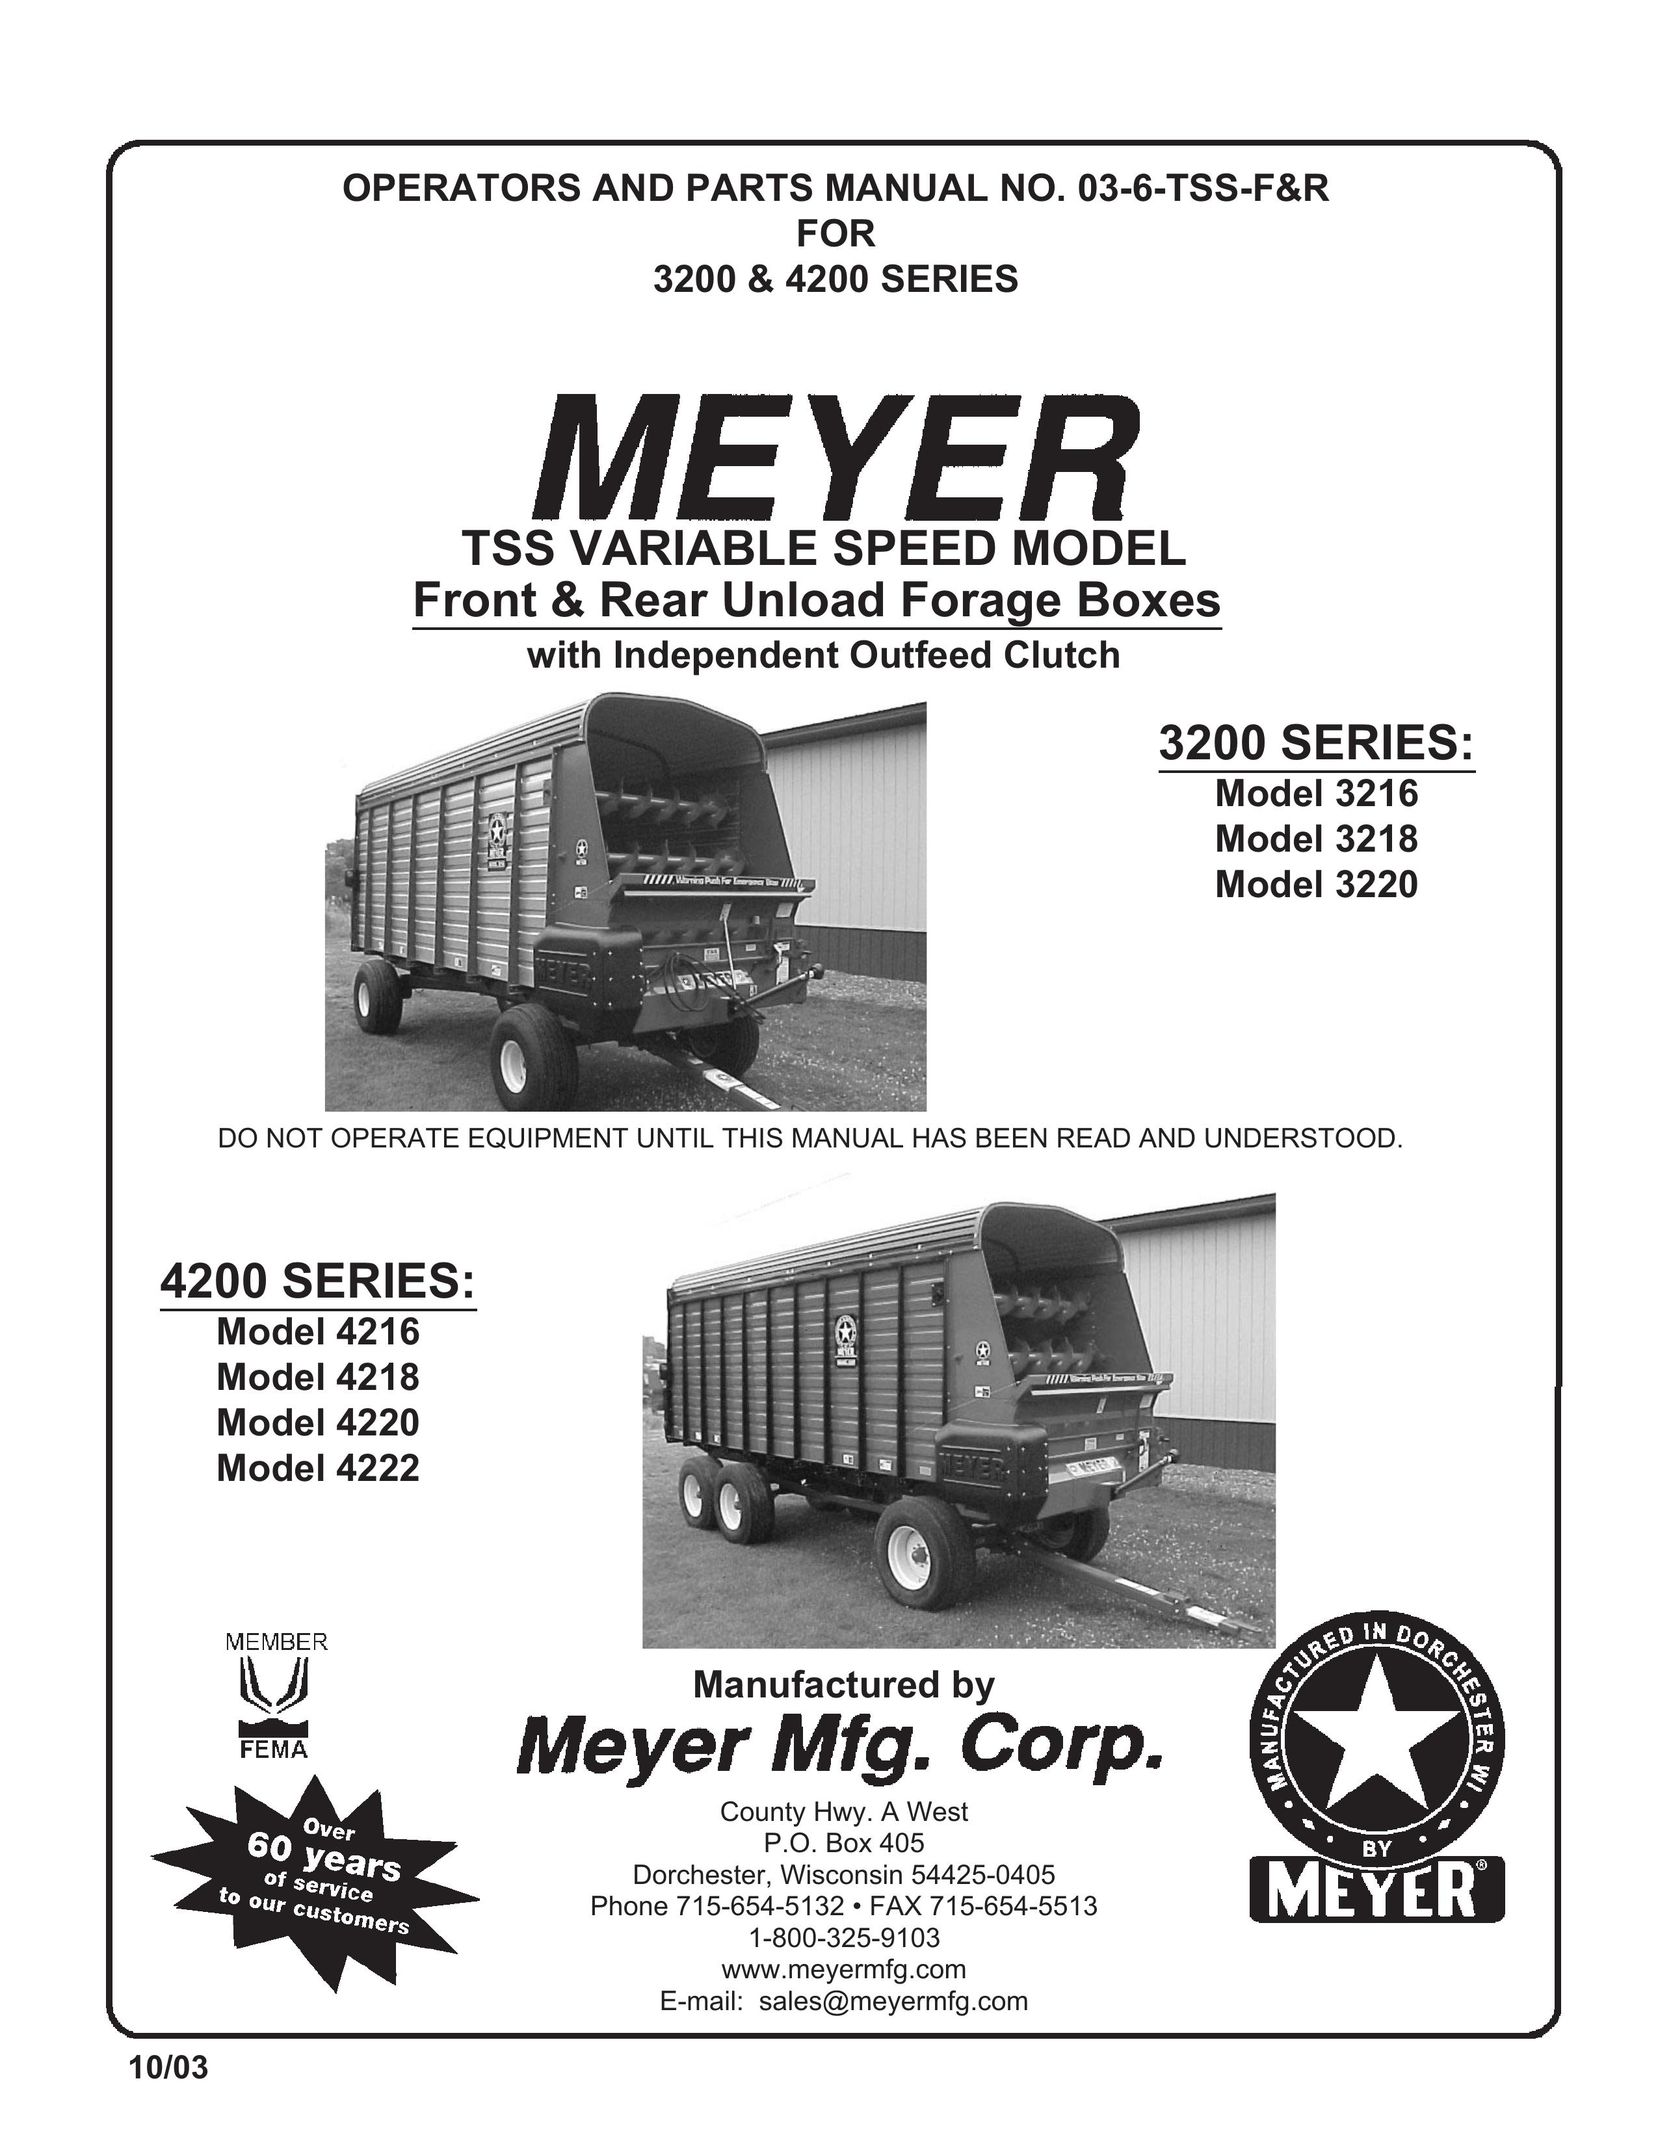 Meyer Front and Rear Unload Forage Boxes with Indpendent Outfeed Clutch Vacuum Cleaner User Manual